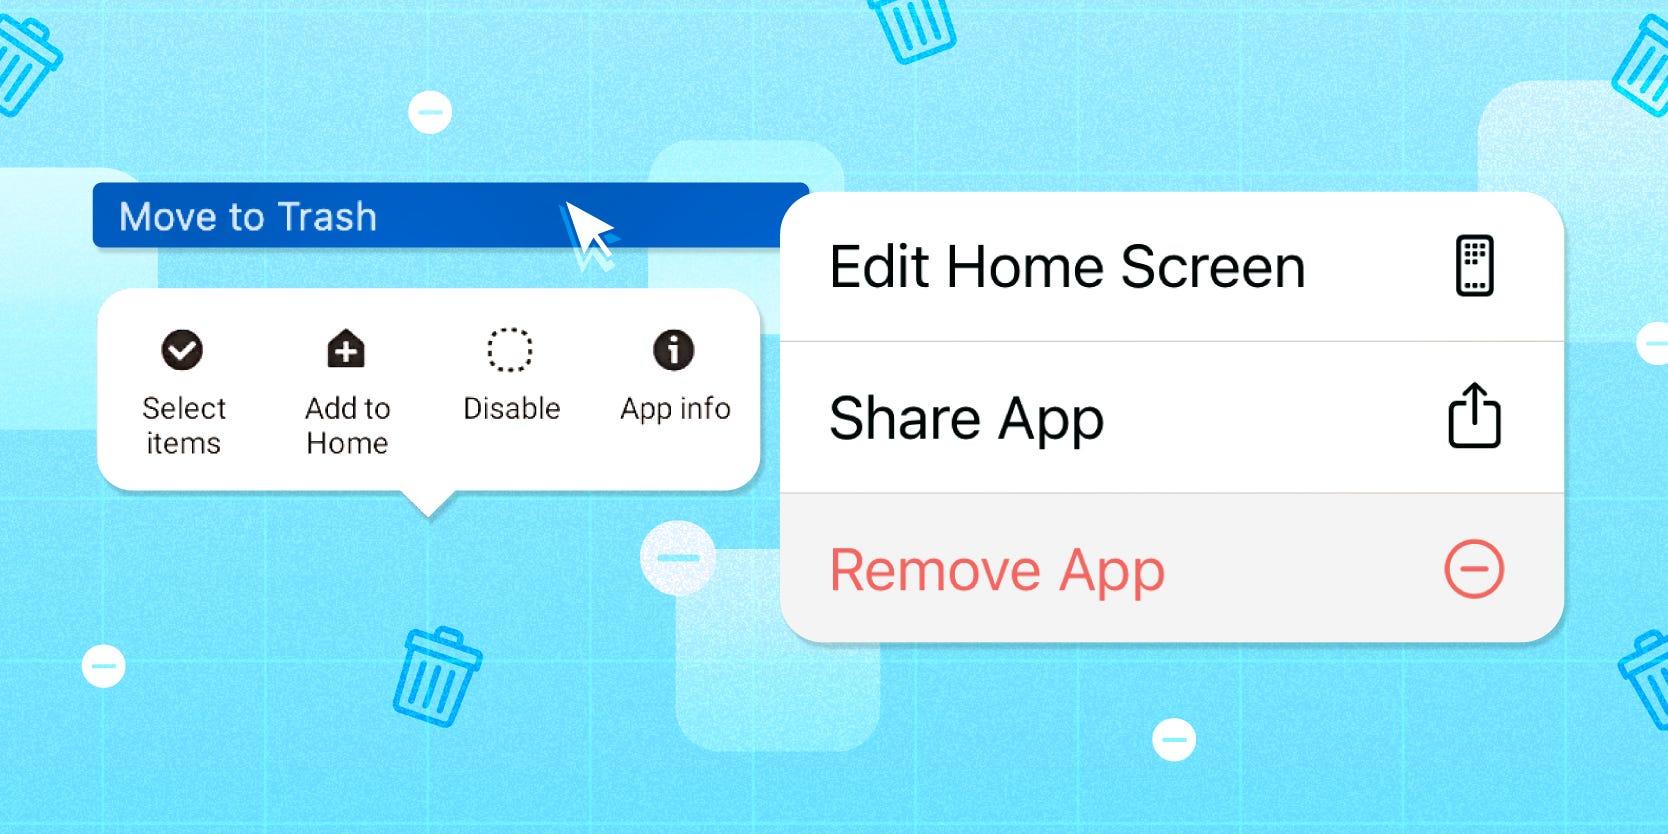 Does deleting apps save memory?